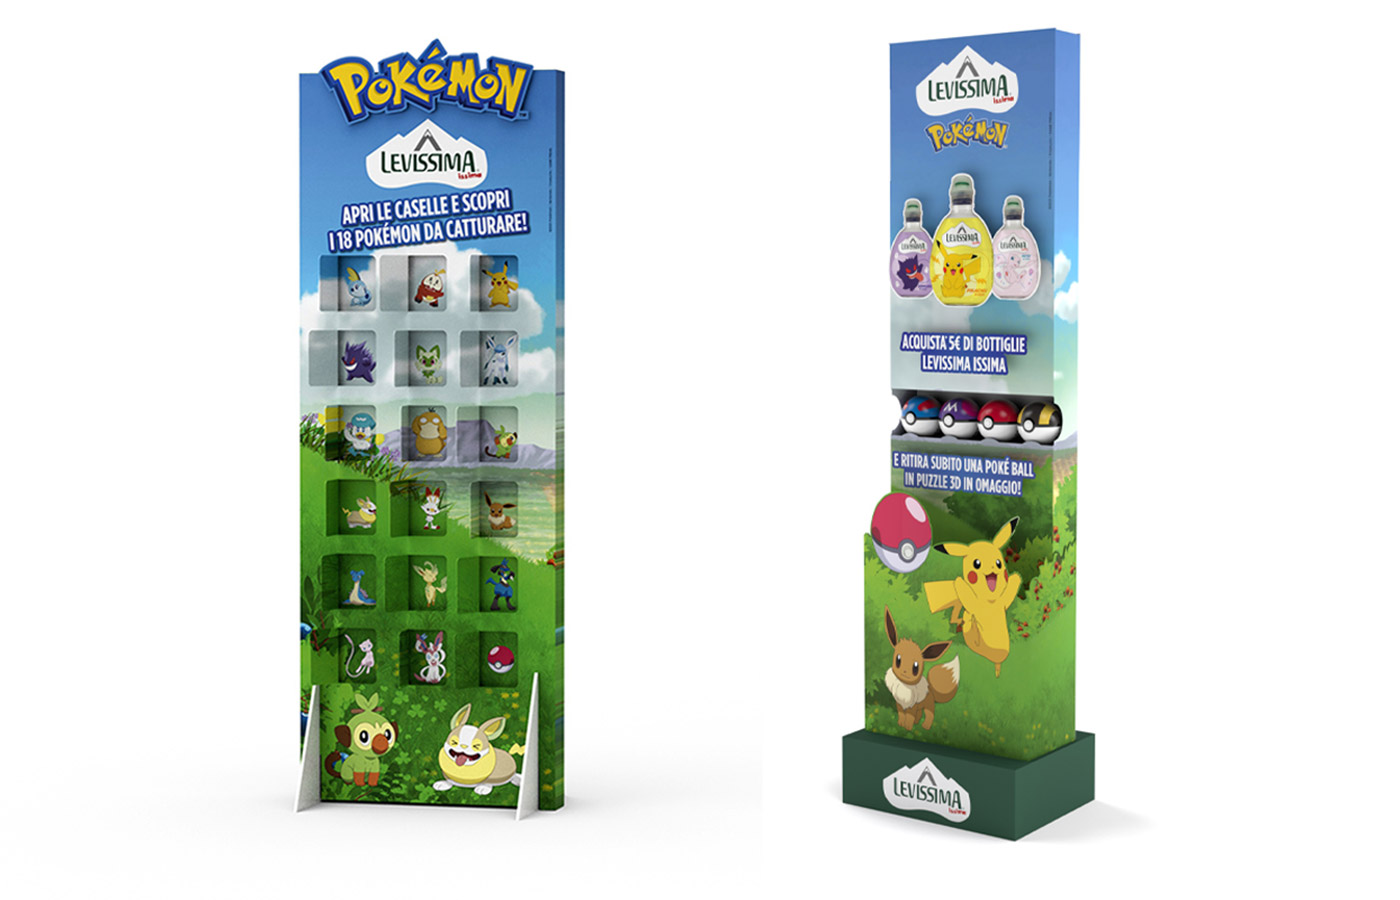 The Issima Pokémon communication materials ATC created for the point of sales